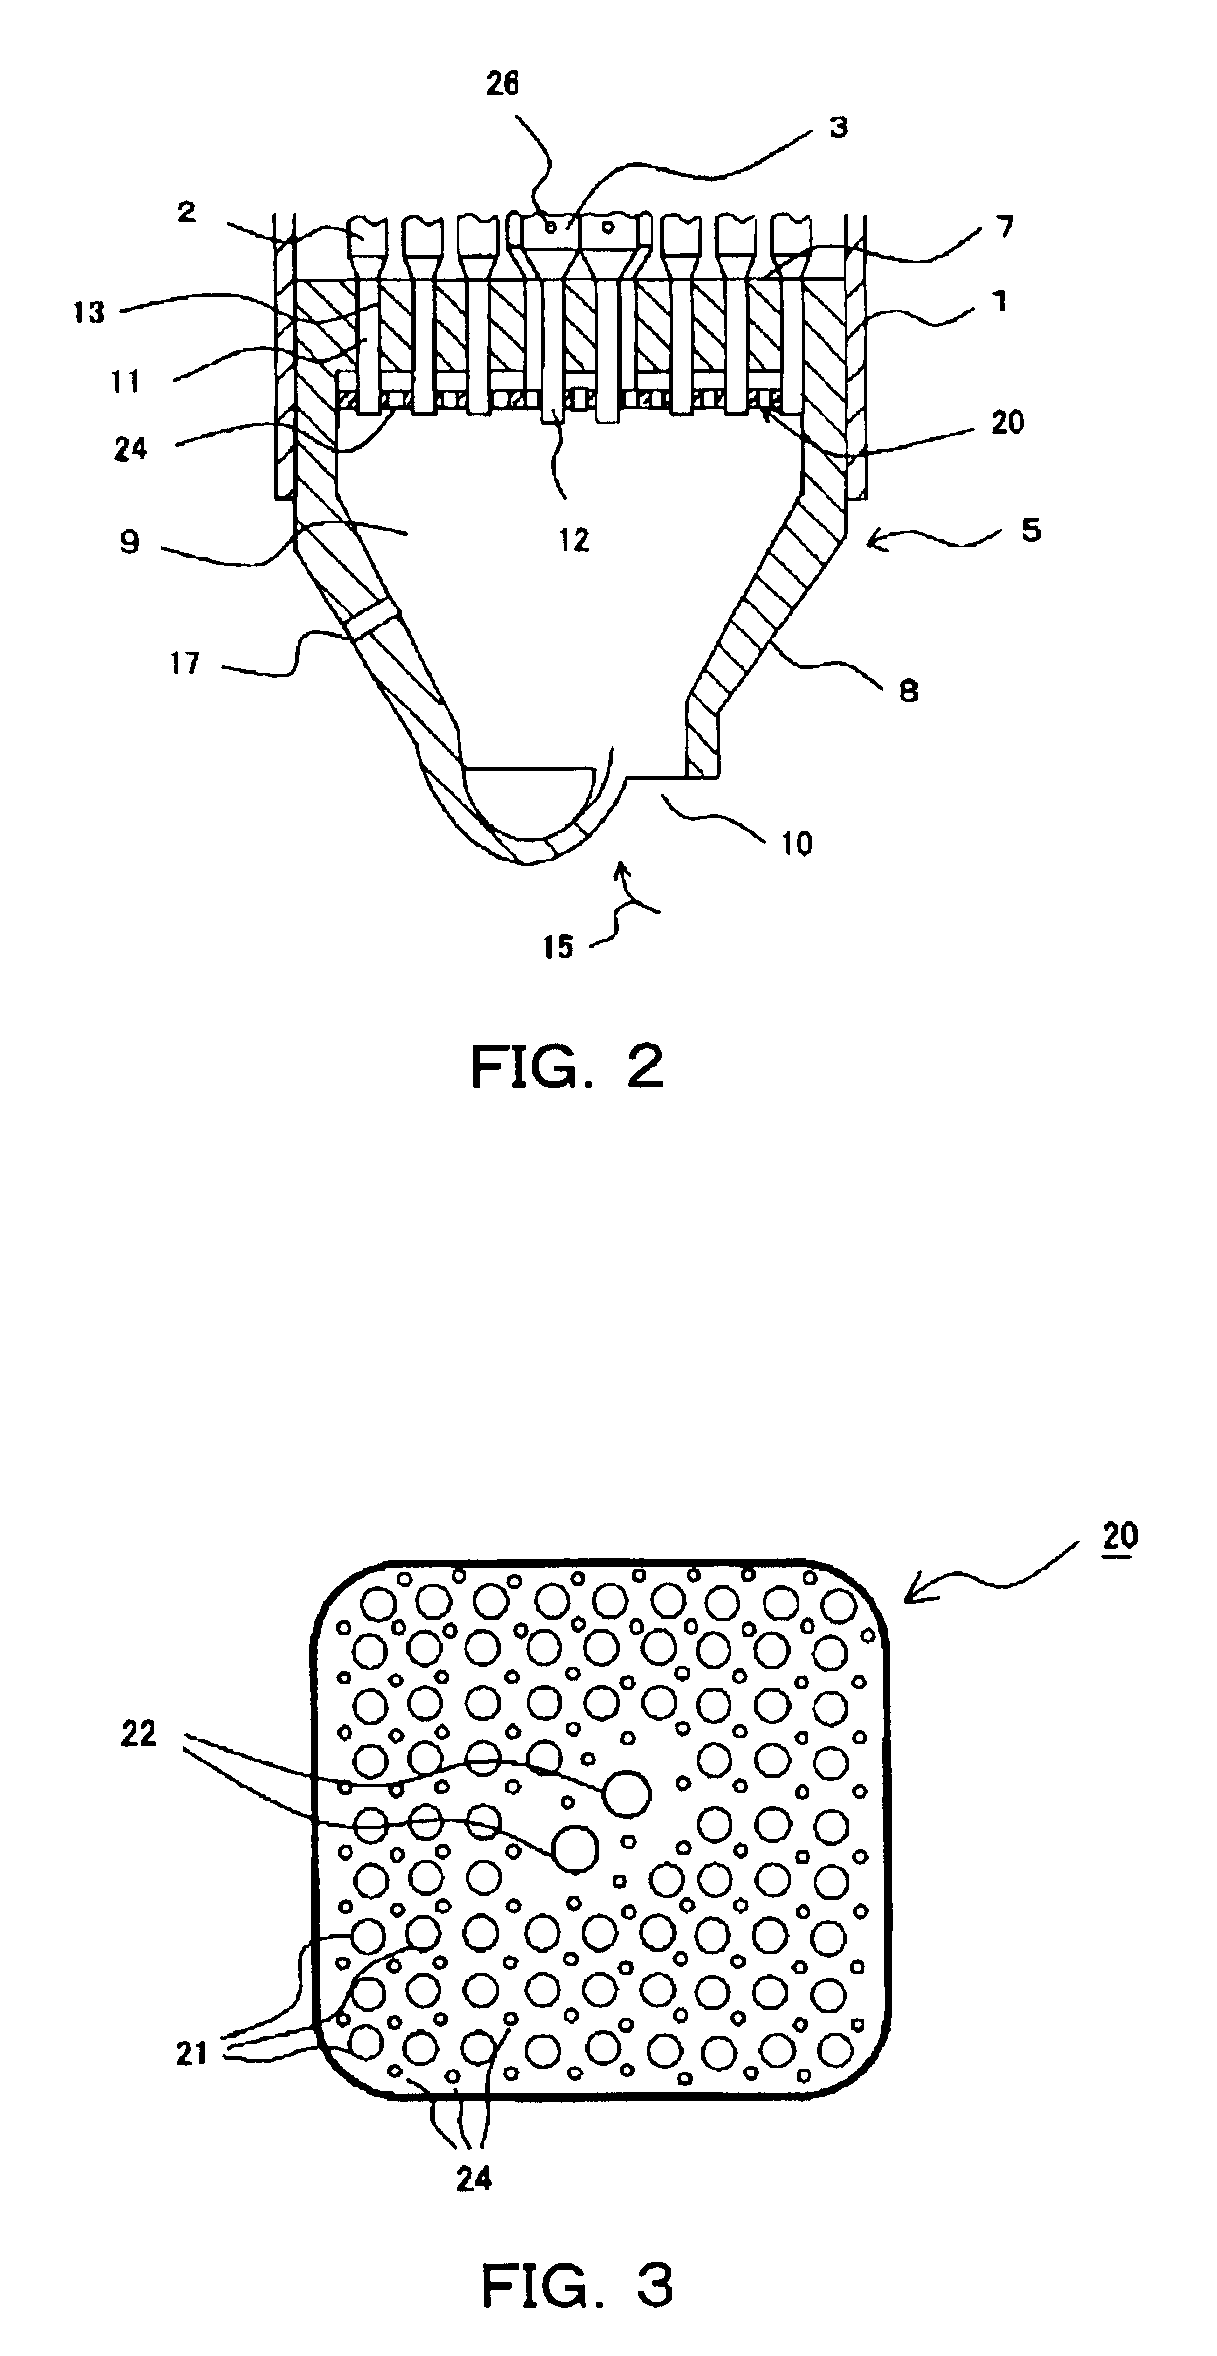 Nuclear fuel assembly lower tie-plate and method of its assembling